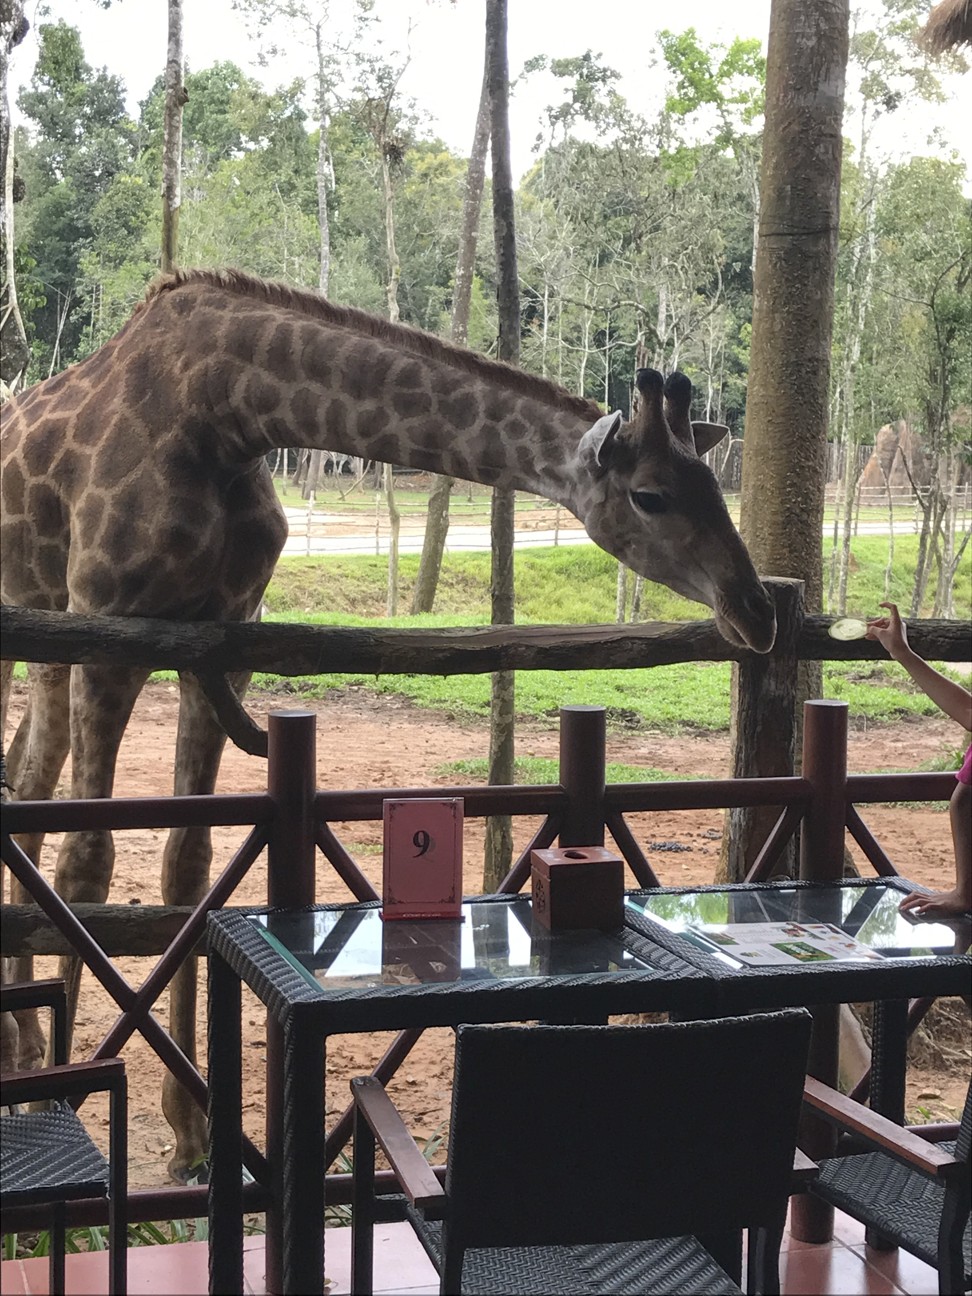 Take a seat at Vinpearl Safari’s Giraffe Restaurant and you will likely be joined by a long-necked visitor. Picture: Mark Footer